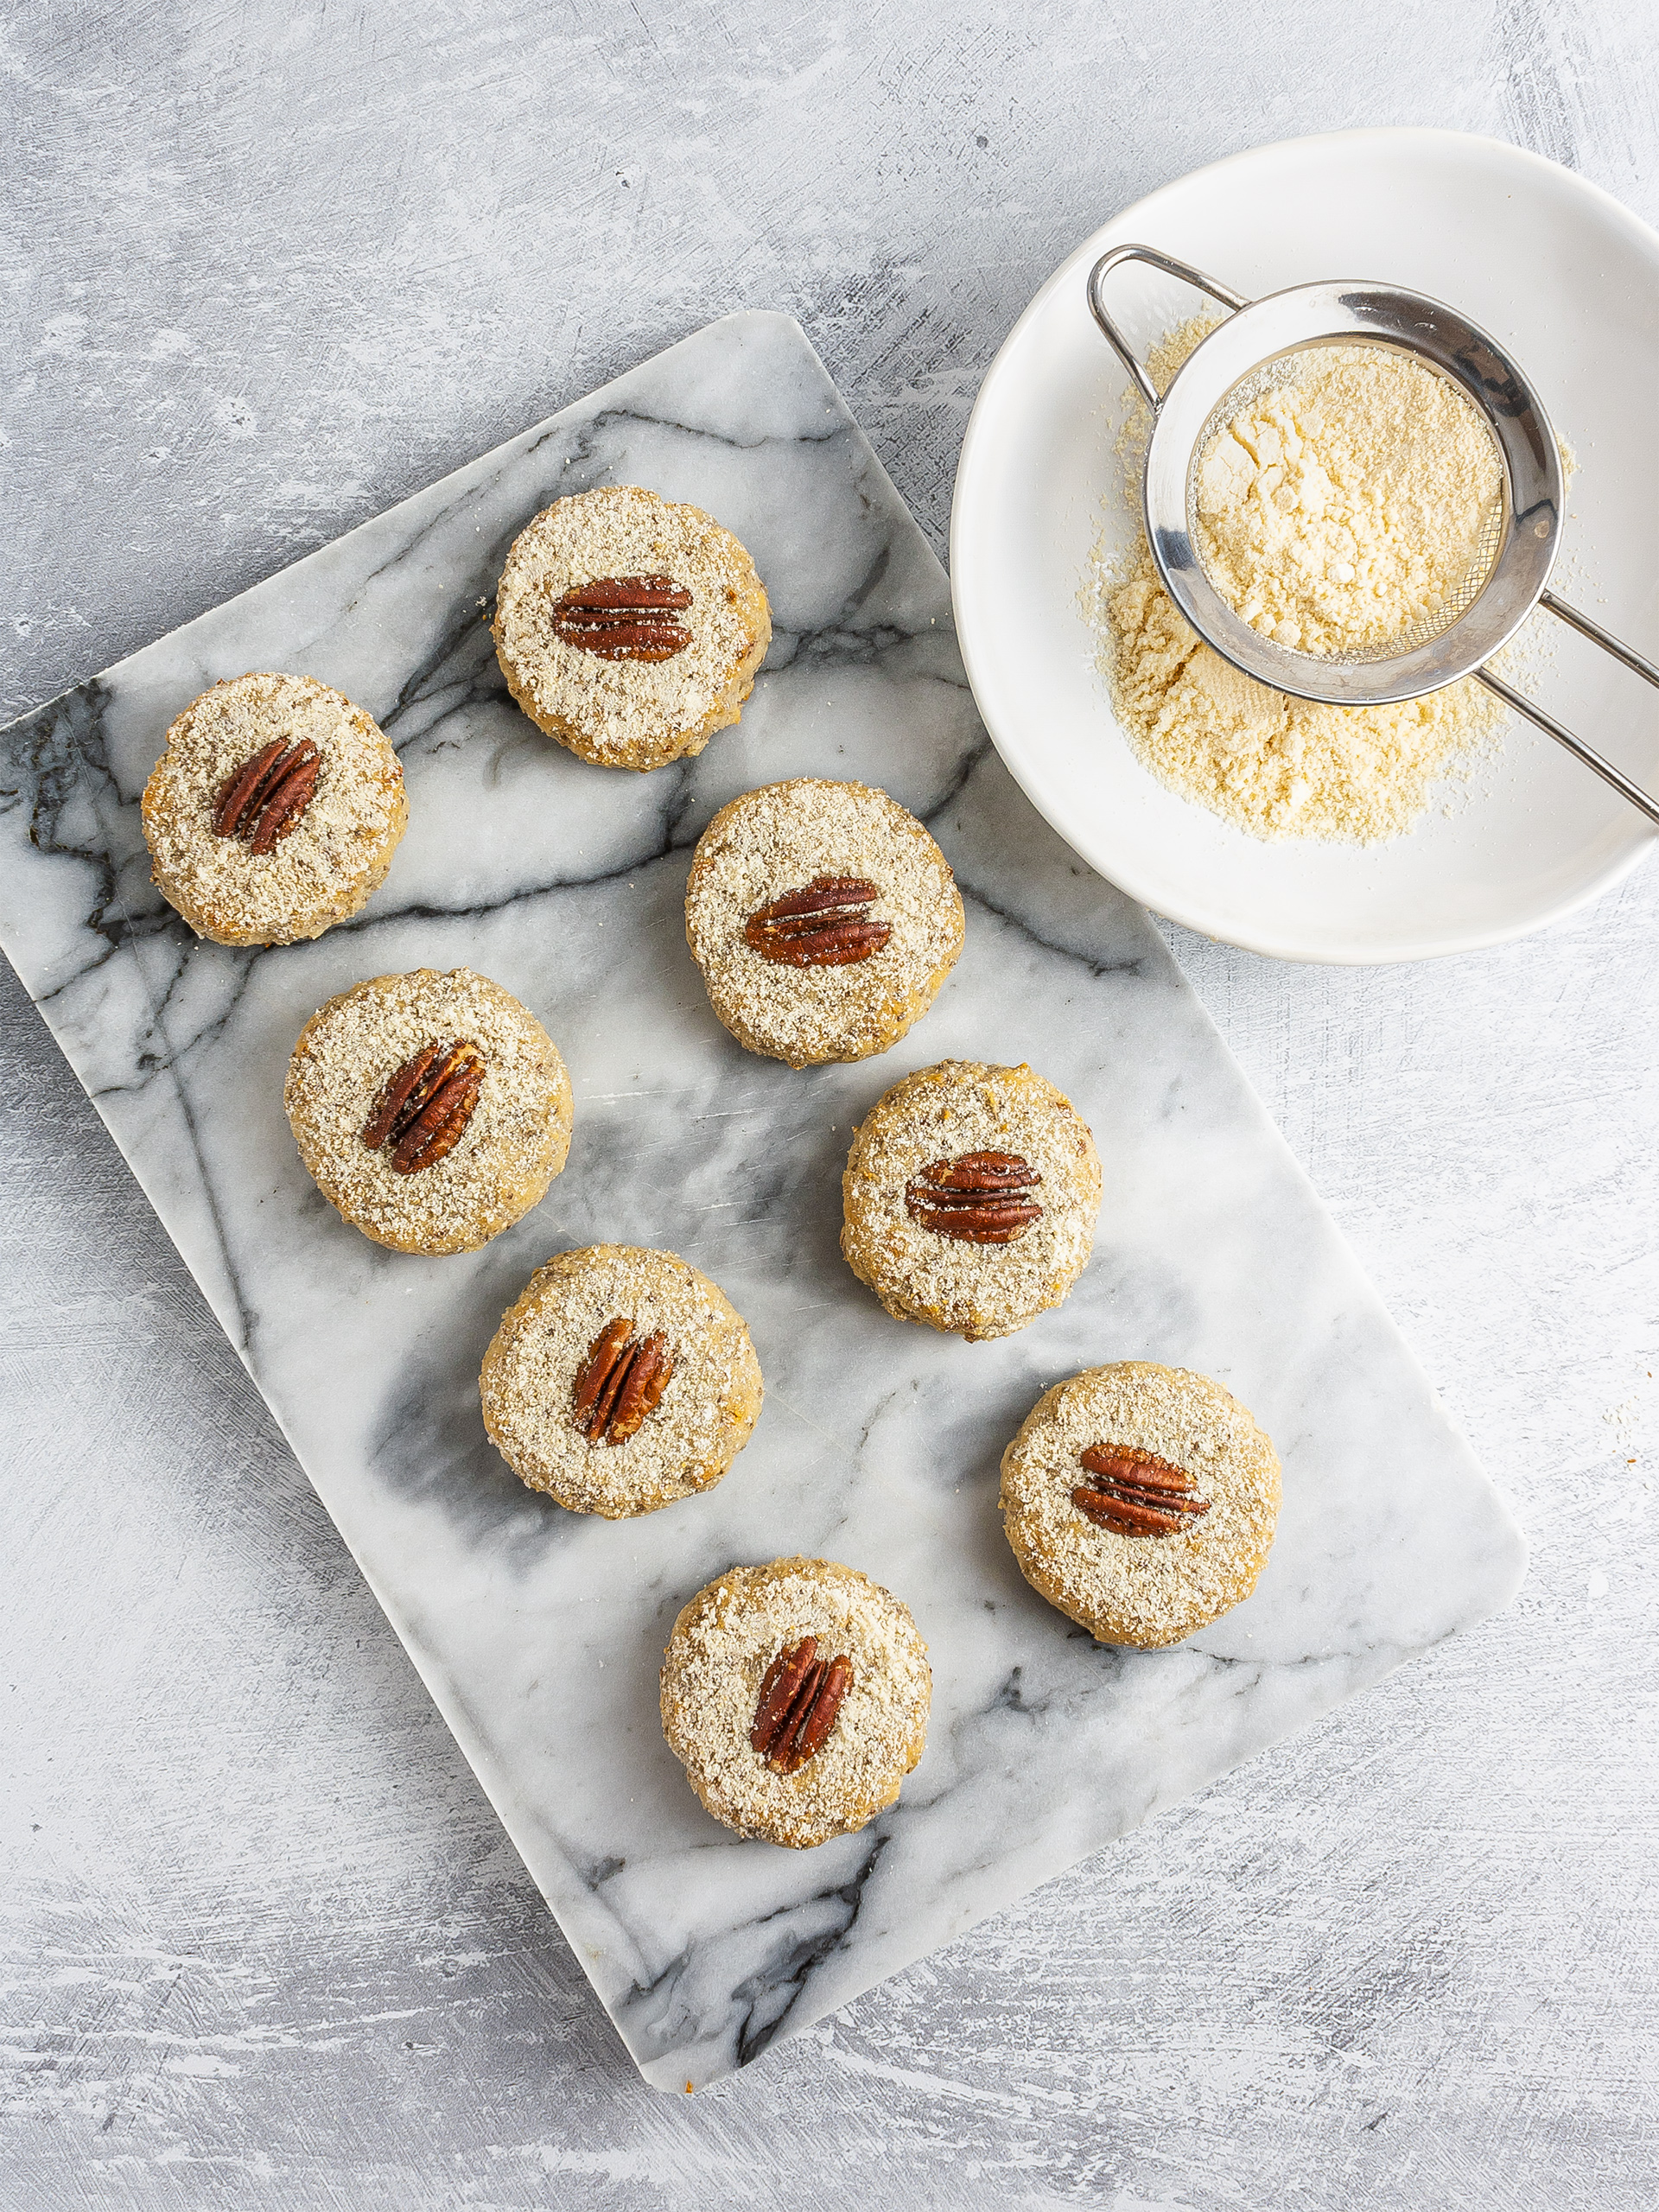 Baked pecan sandies dusted with almond meal